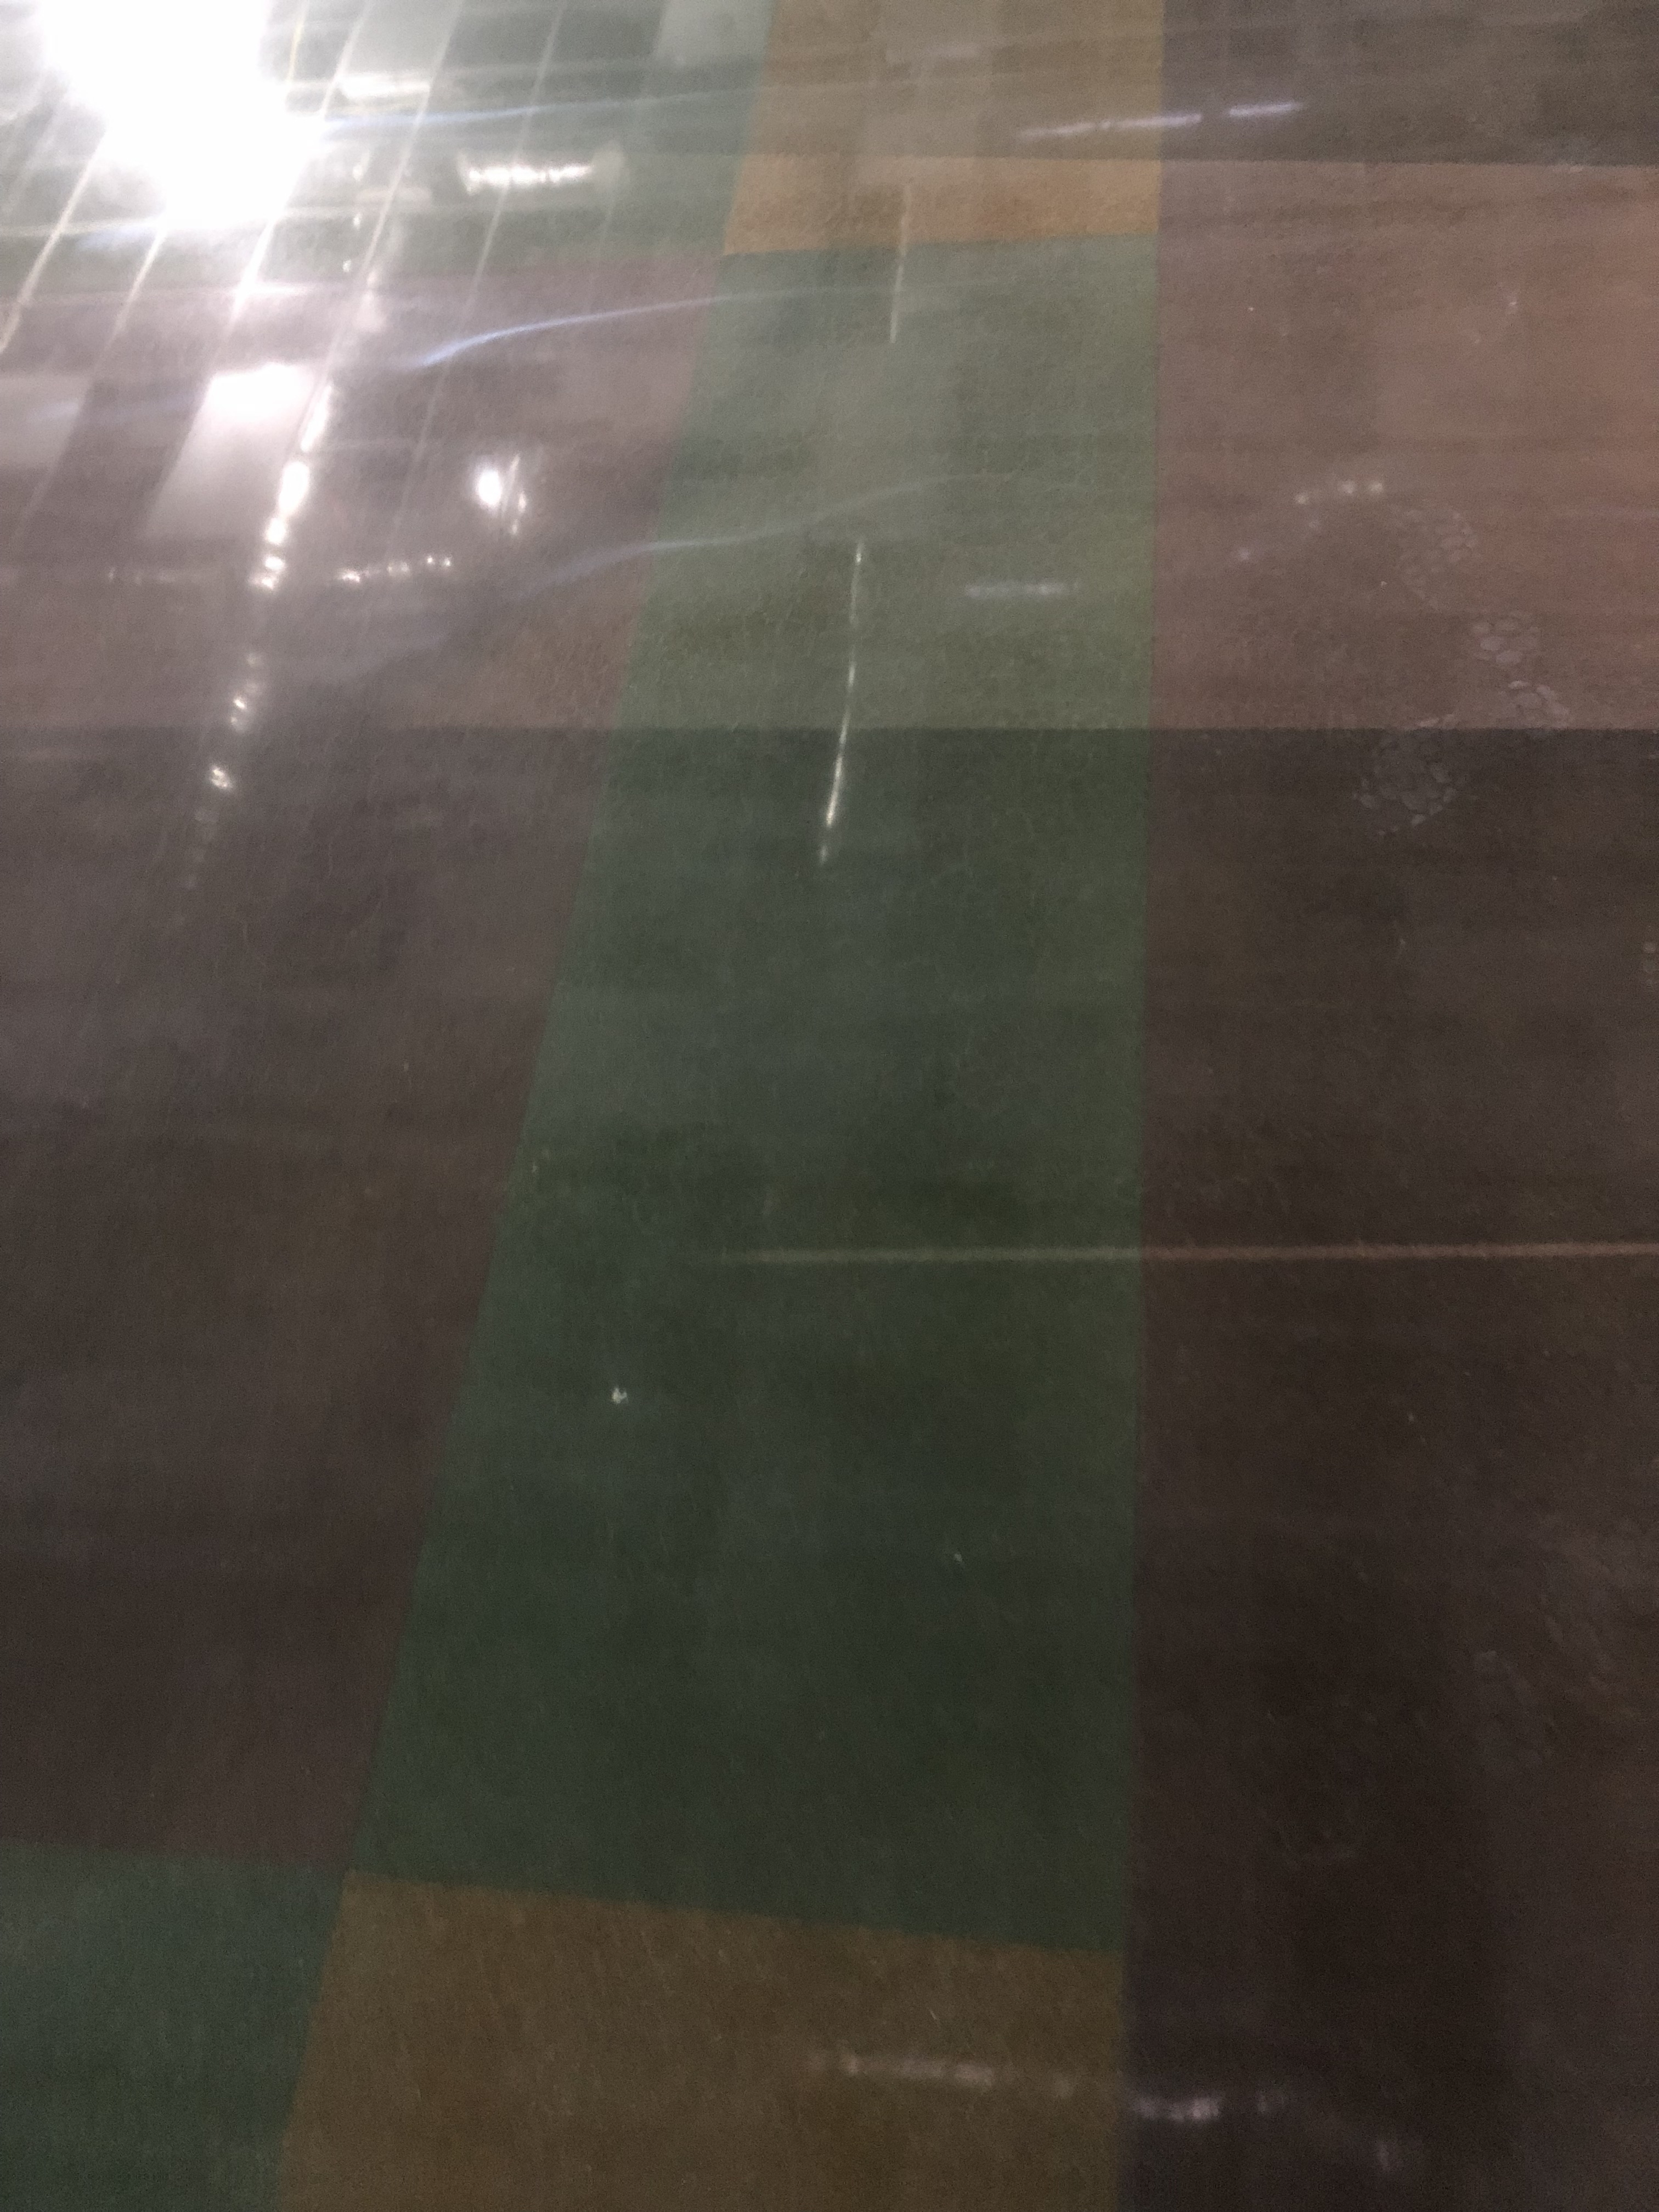 A polished concrete floor demonstrating a red, green, and yellow square pattern.